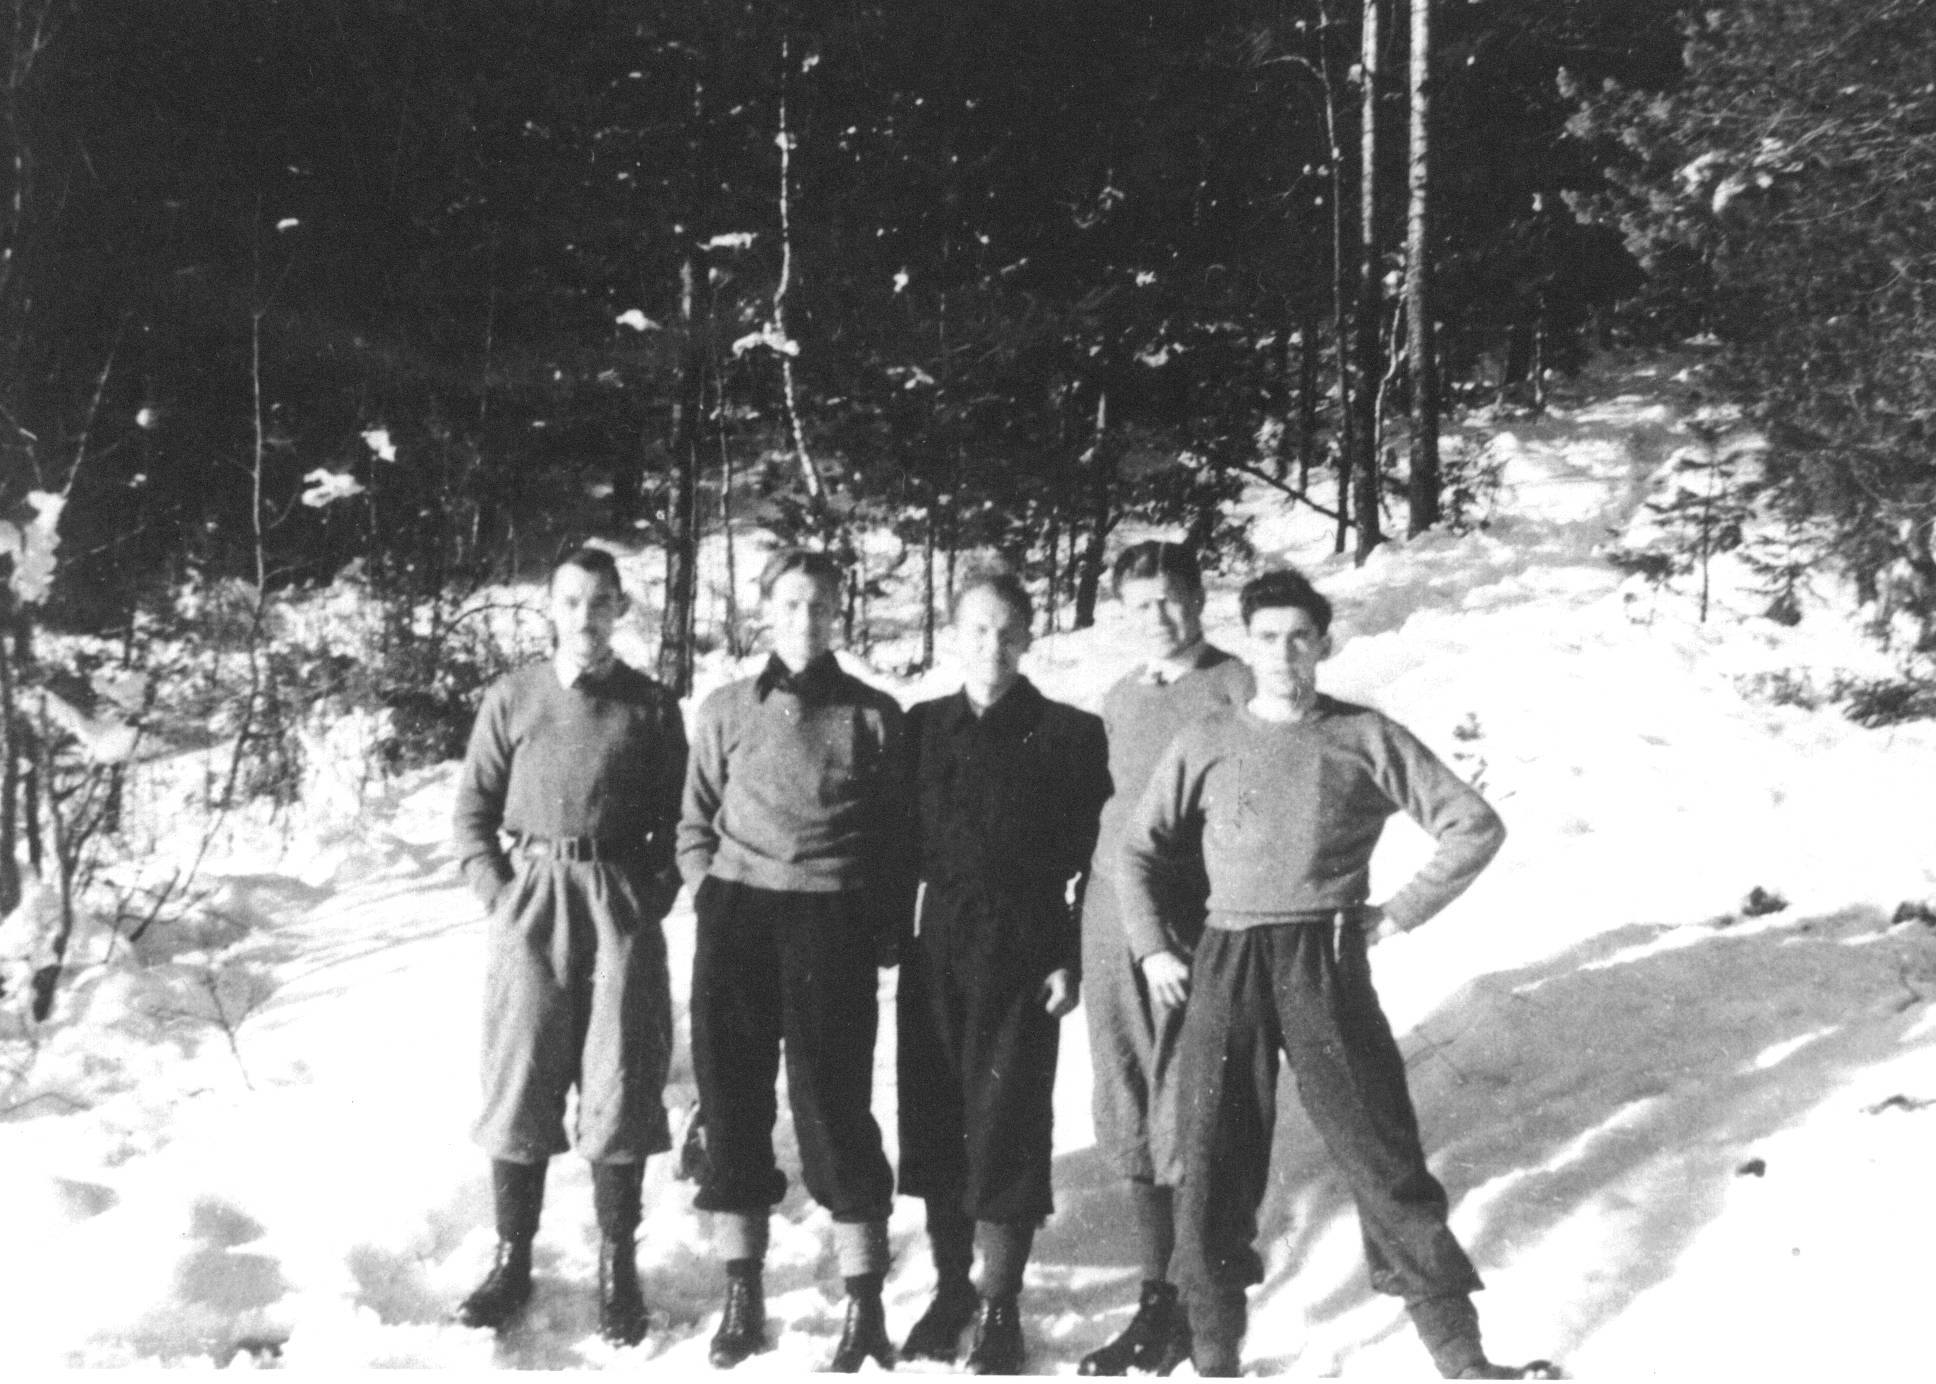 Evaders Bolton, Dalton, Chapin and Hicks with a Norwegian helper [centre]. On a supply drop to a Mil Org group in the Telemark region the Crew’s Stirling iced-up and crashed. The surviving crew reached Sweden by an overland route.